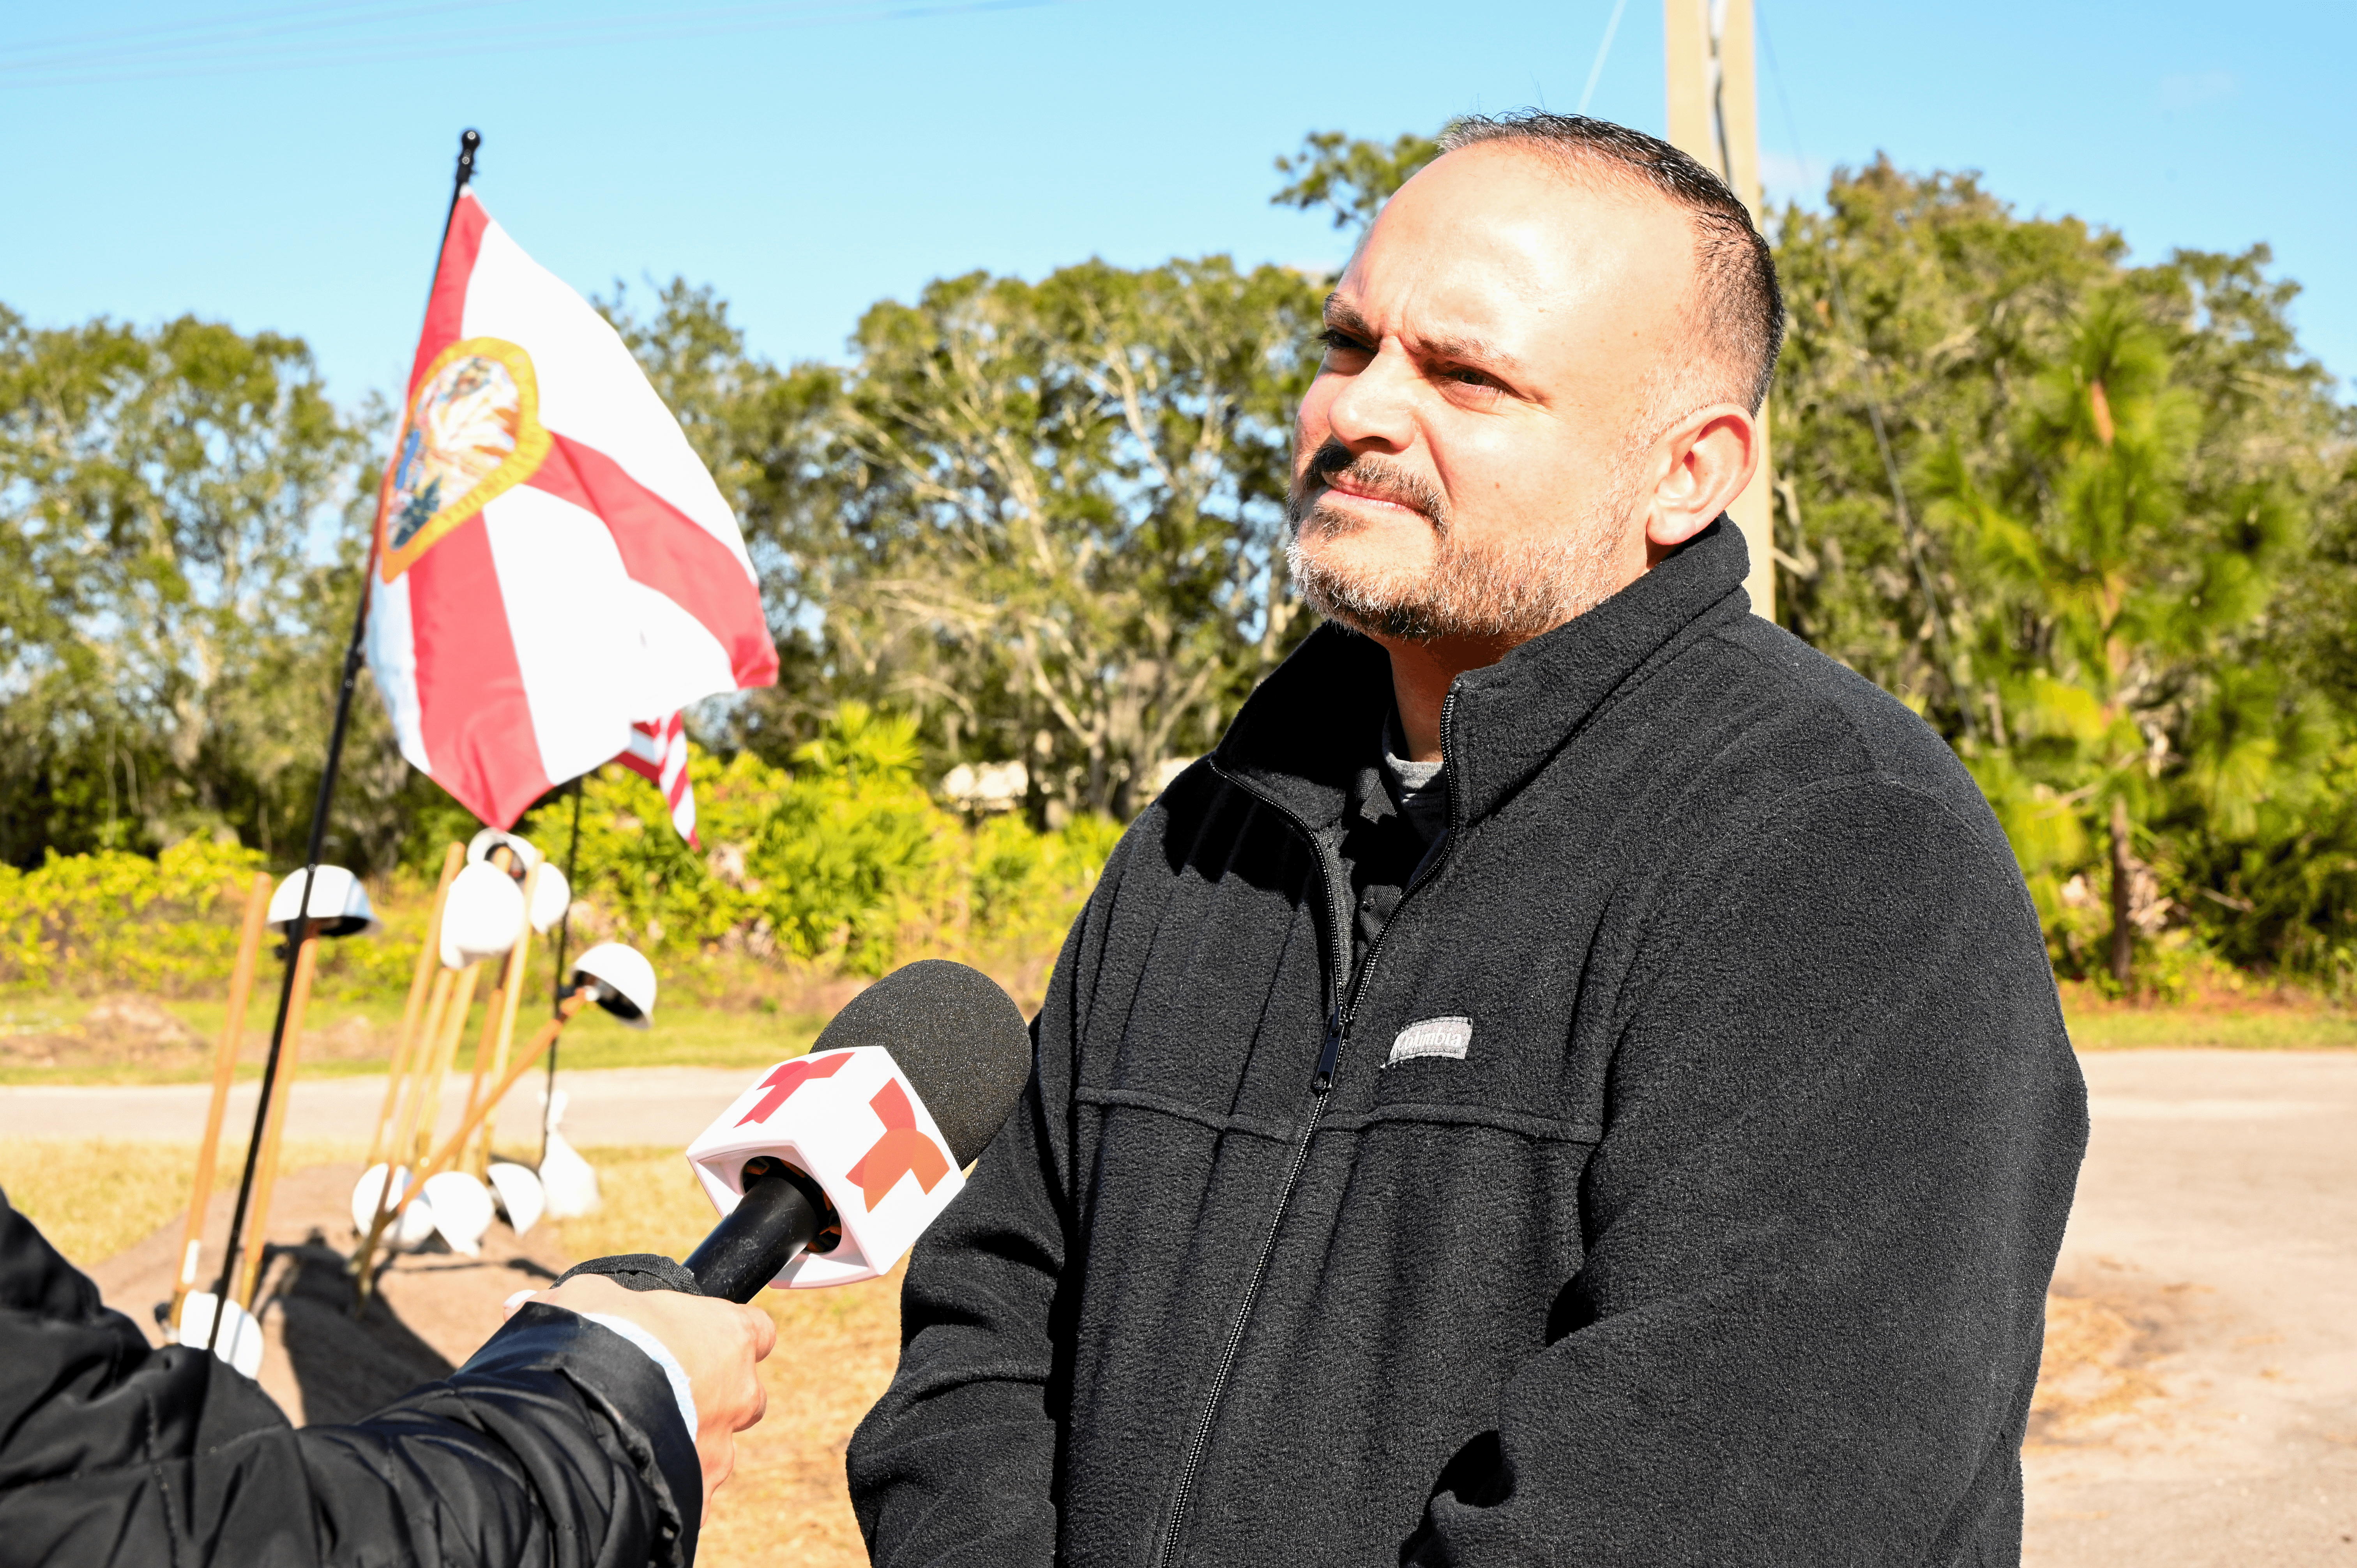 A man answering questions about the groundbreaking. A Florida flag, shovels, and hard hats can be seen in the background